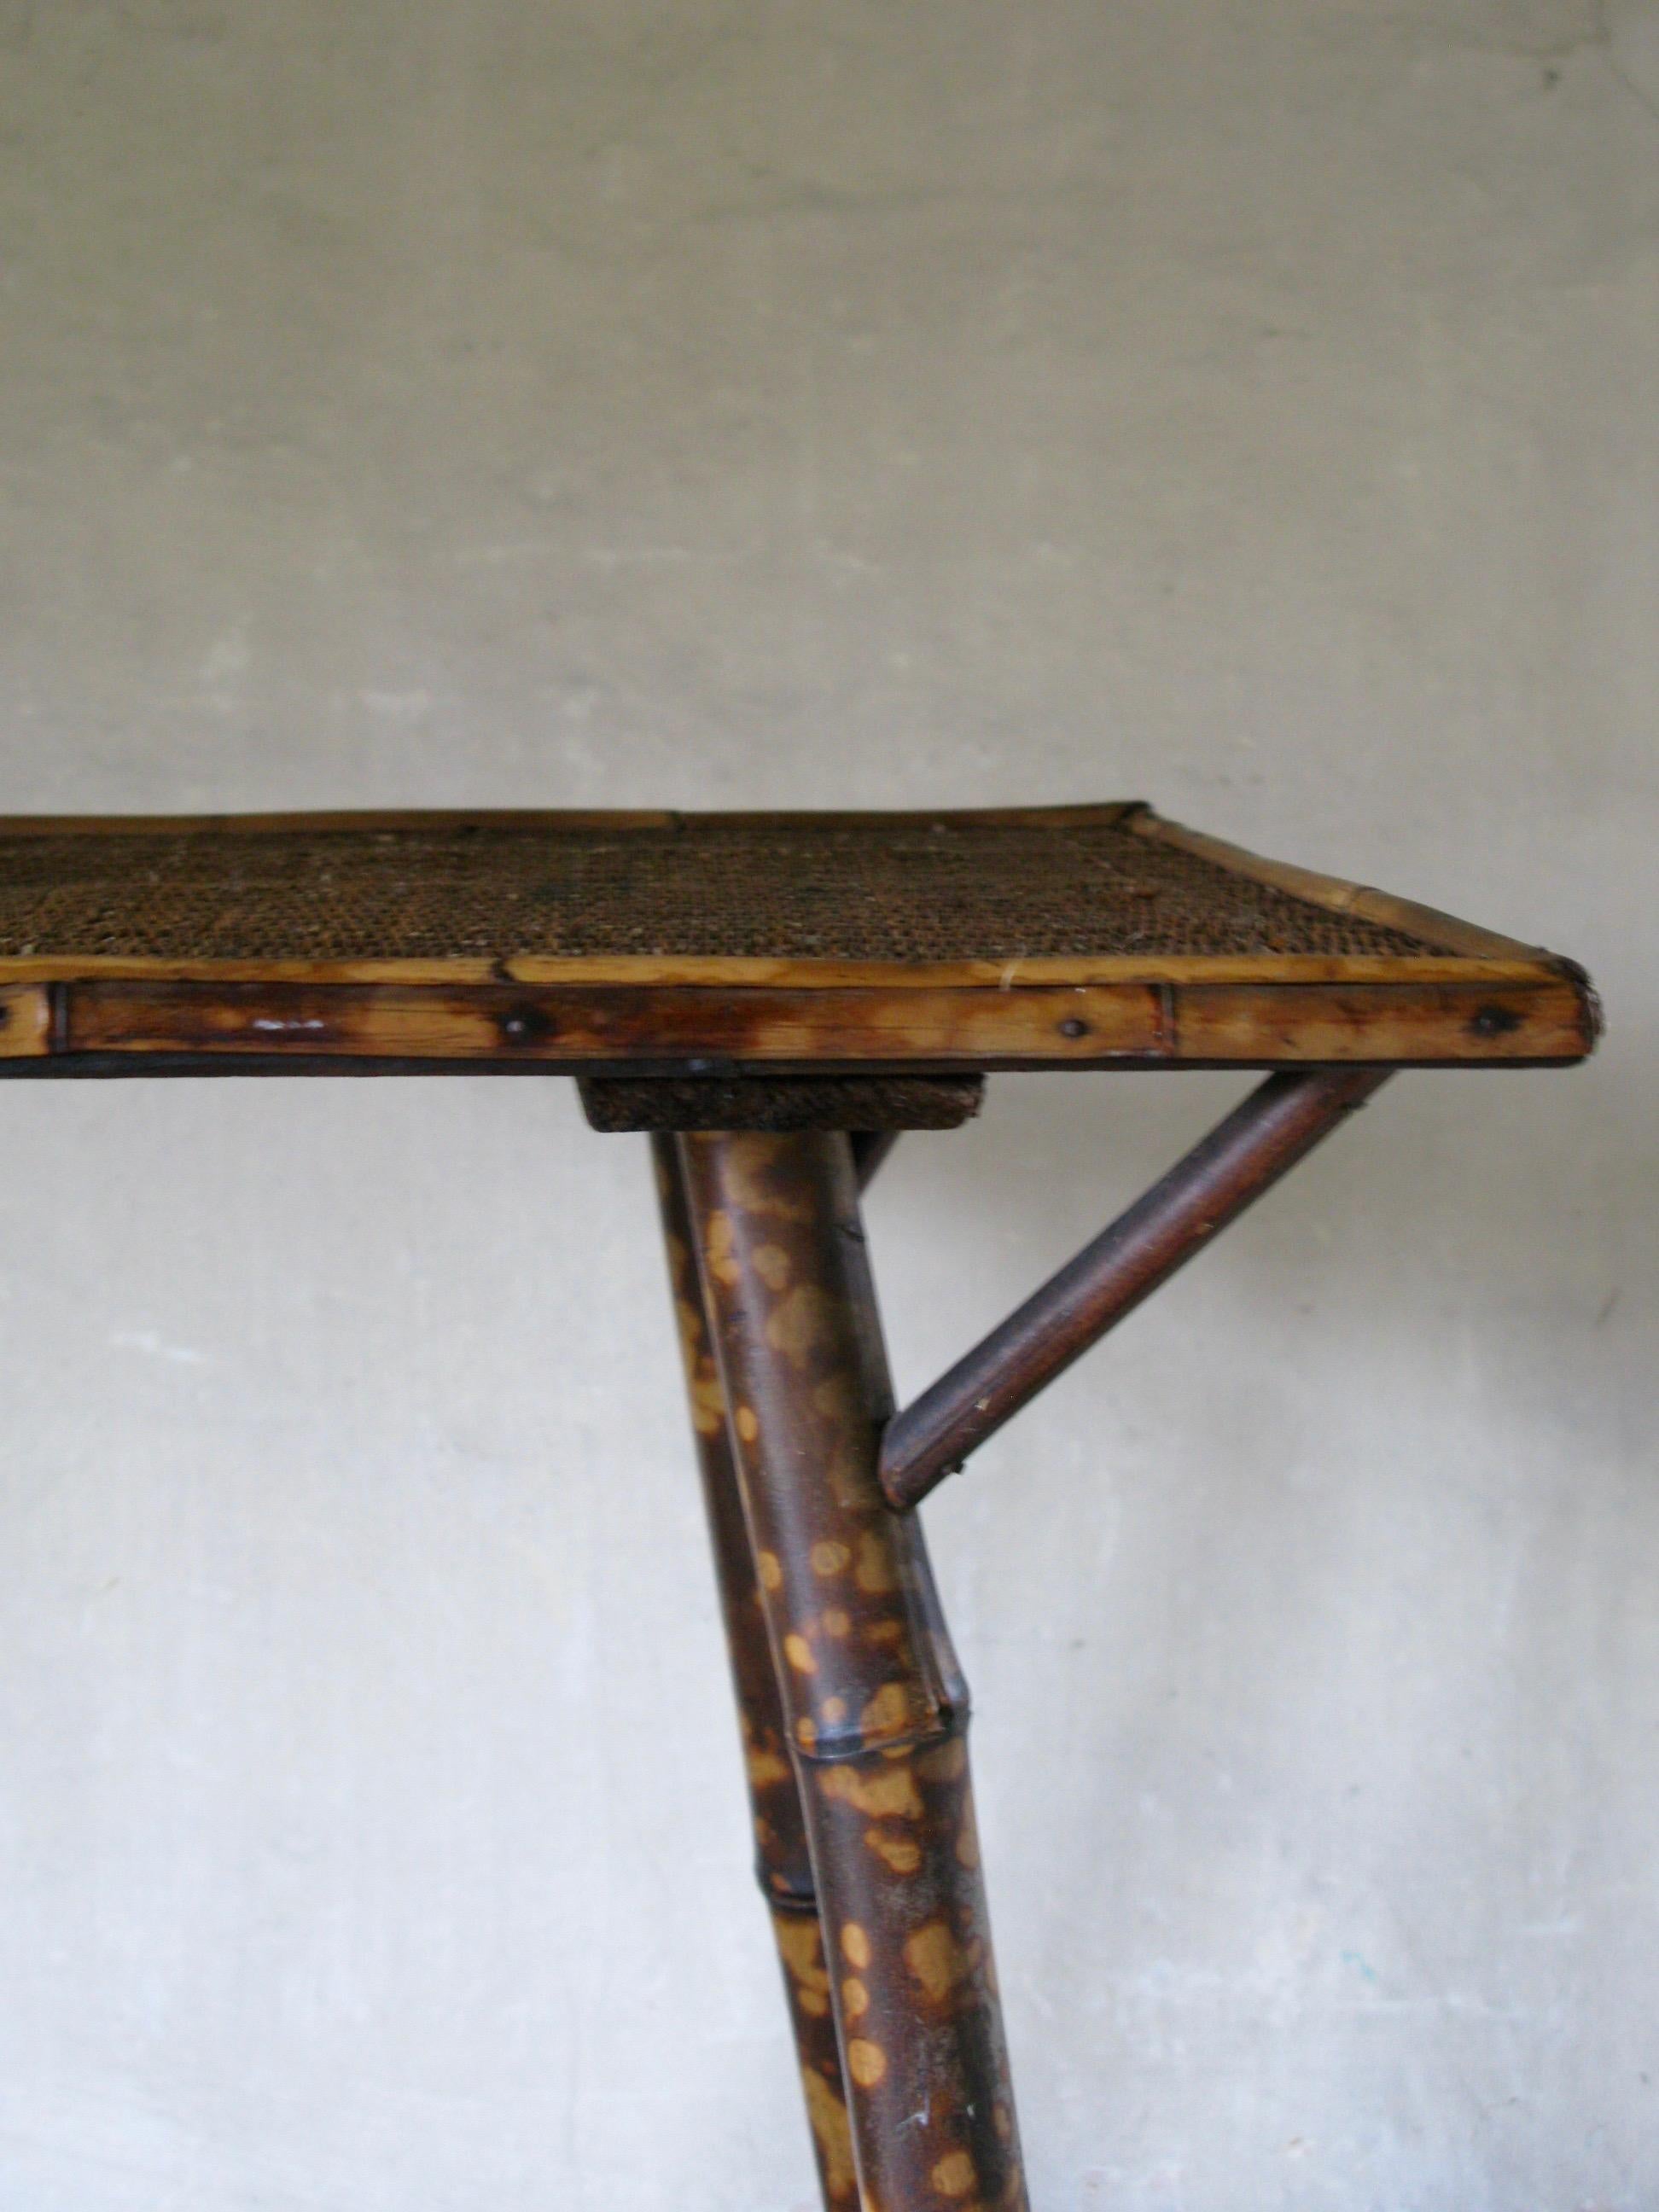 Lovely antique tiger bamboo table from the Victorian period.